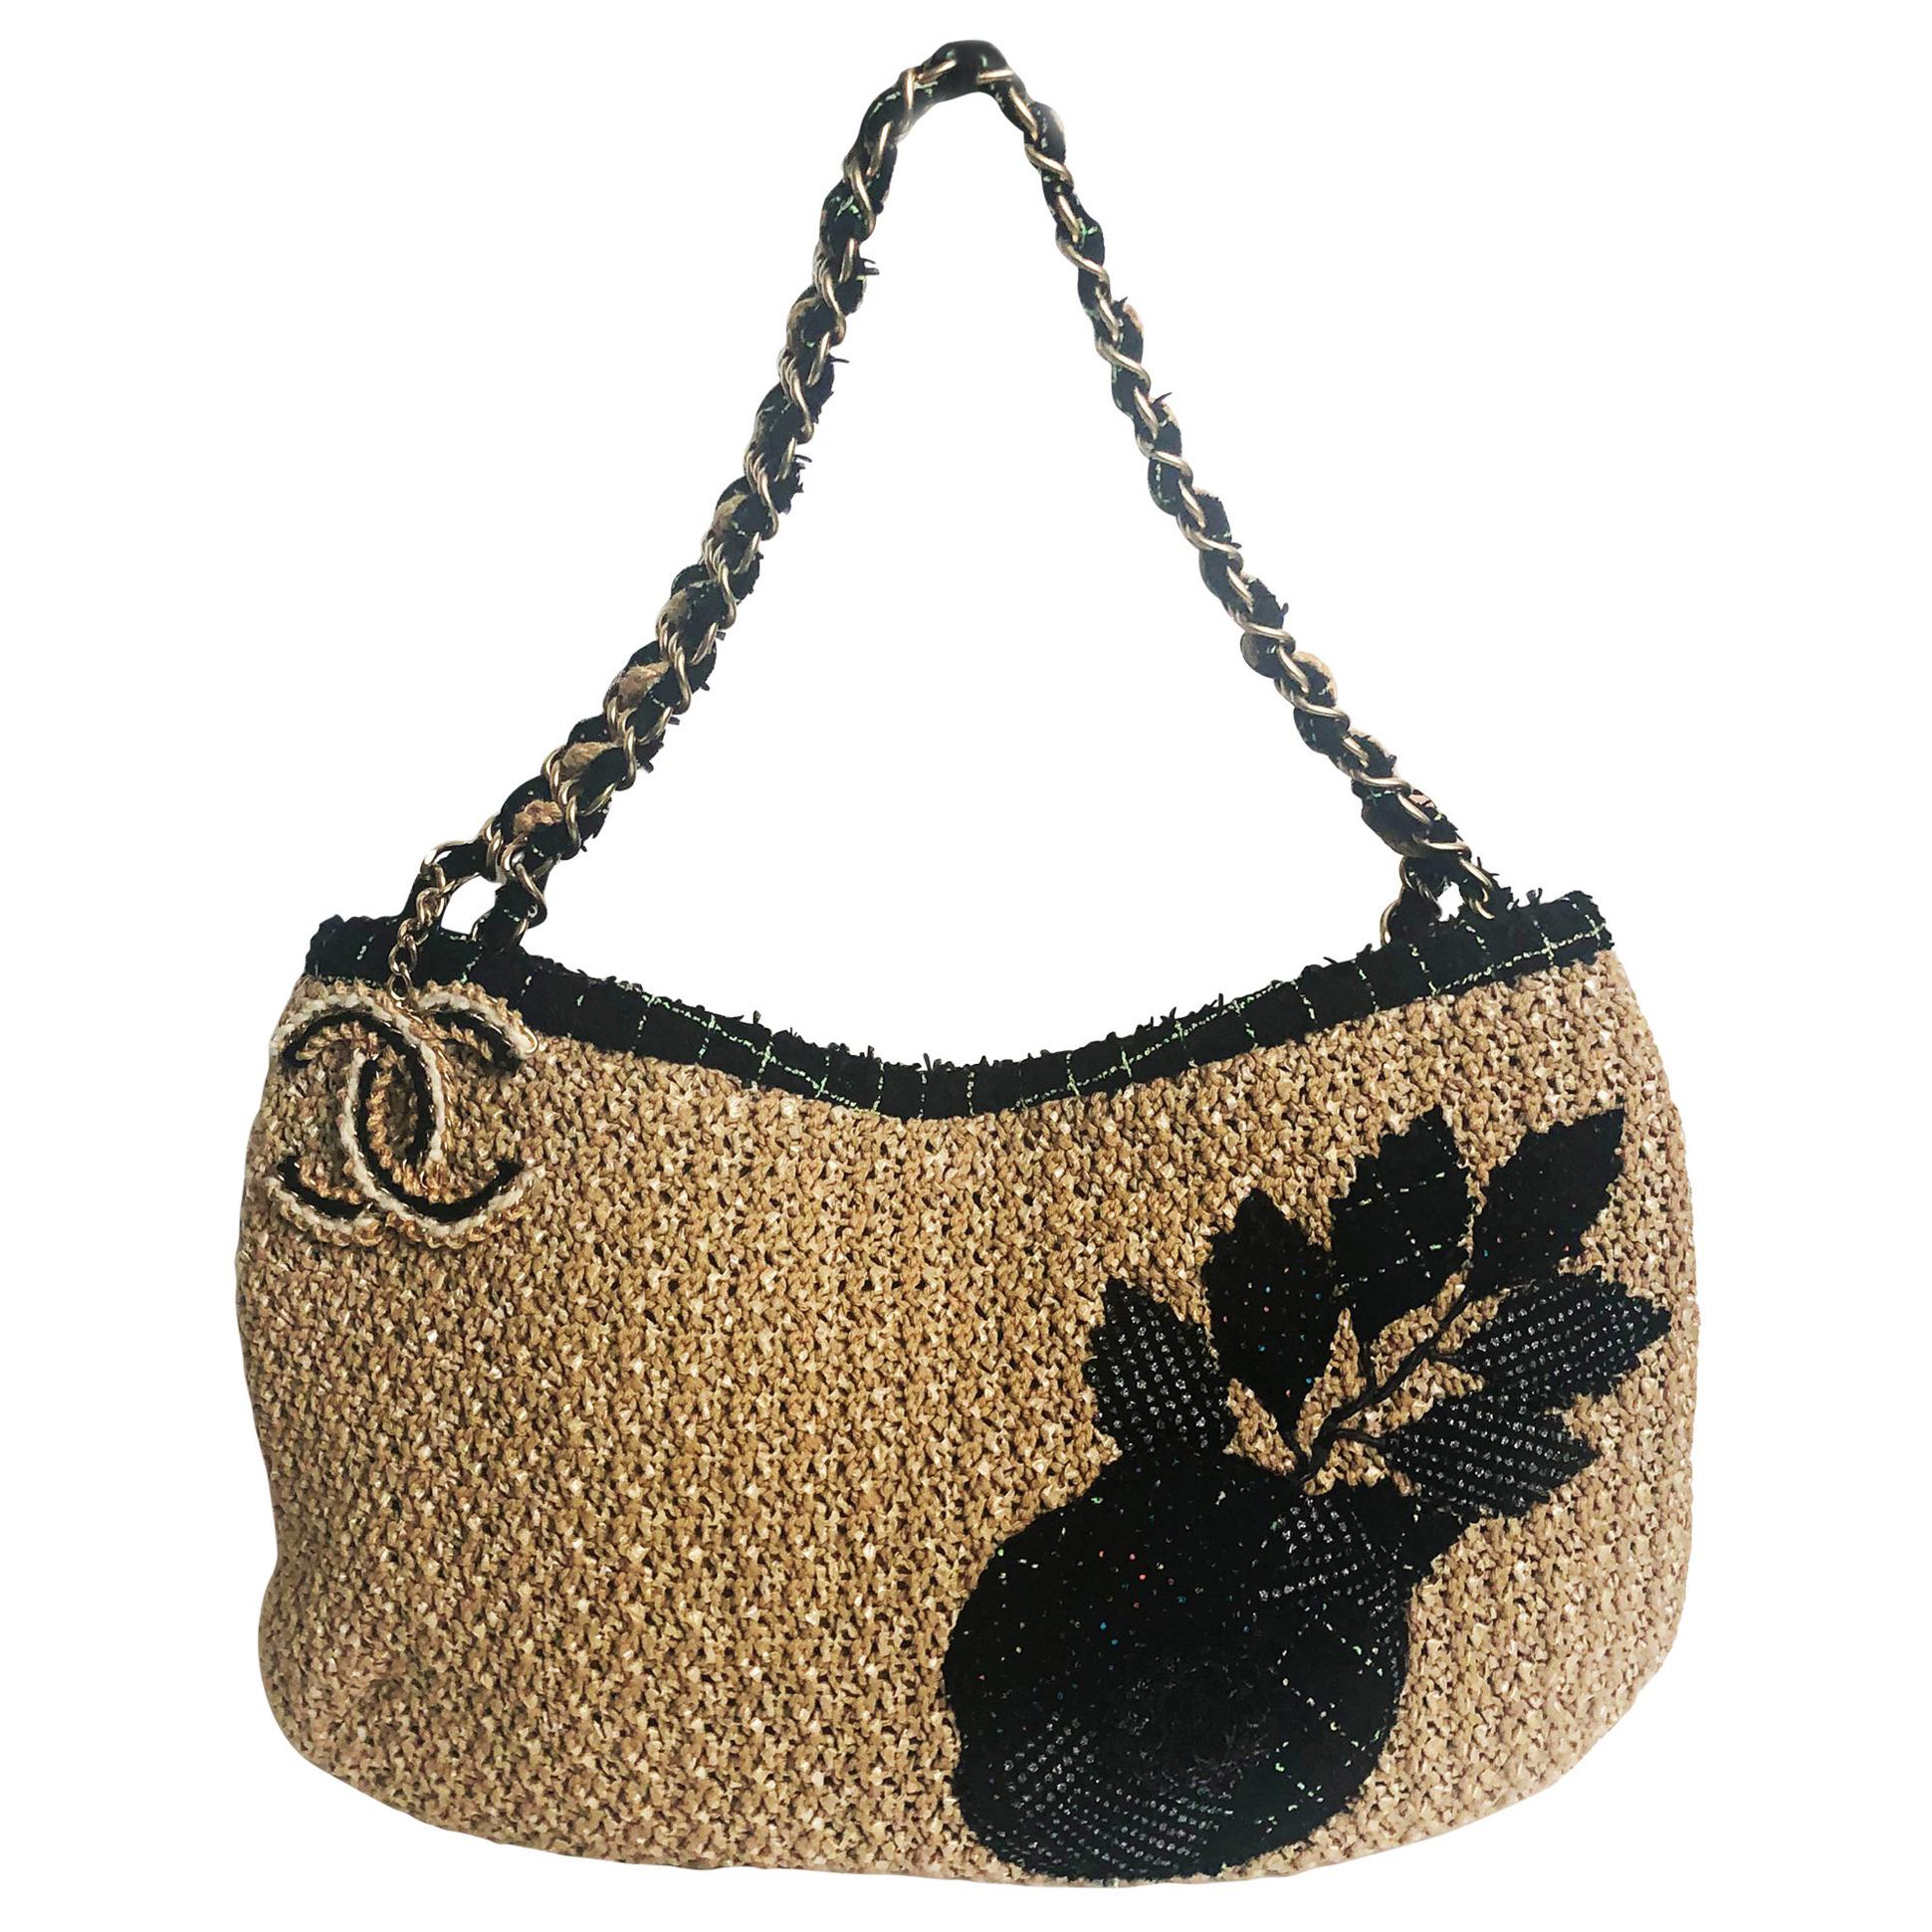 Chanel Coco Country Camellia Bag Woven Straw Tote 2010 Collection at 1stDibs